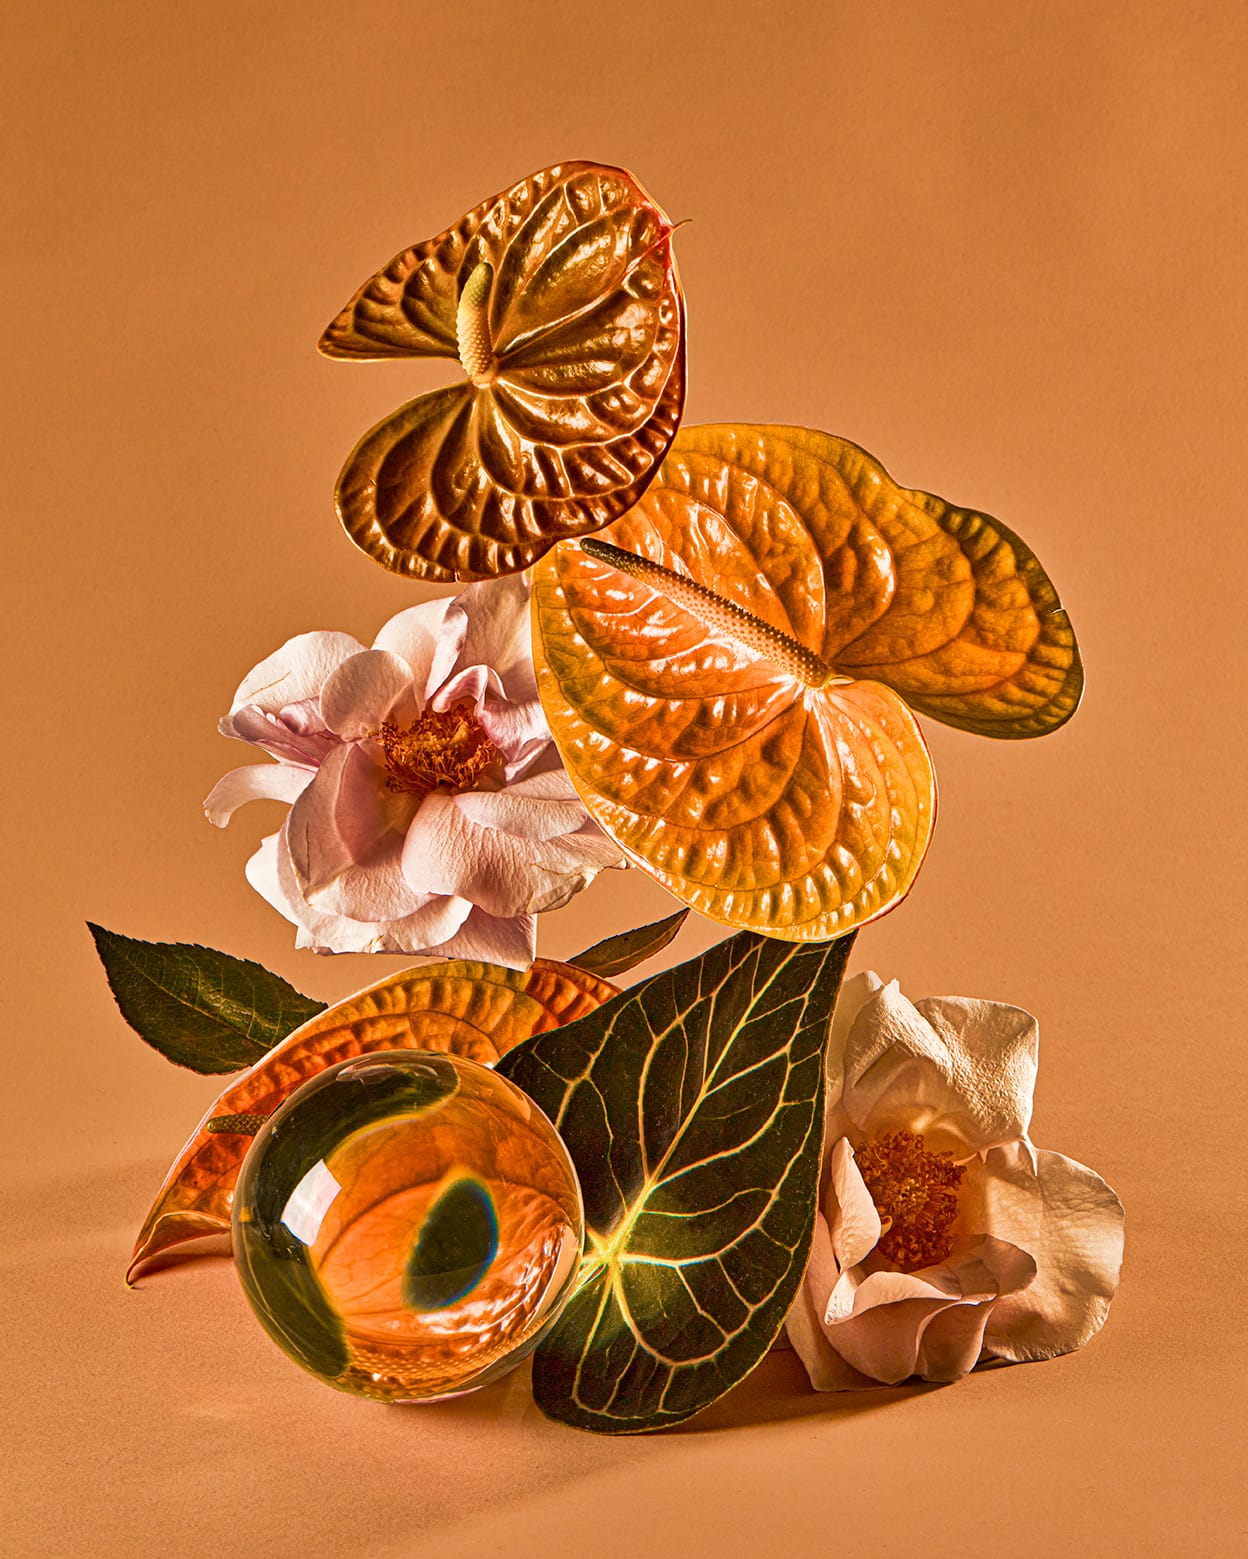 Perspective, Florals Distorted Through Water Vessels By Suzanne Saroff (6)